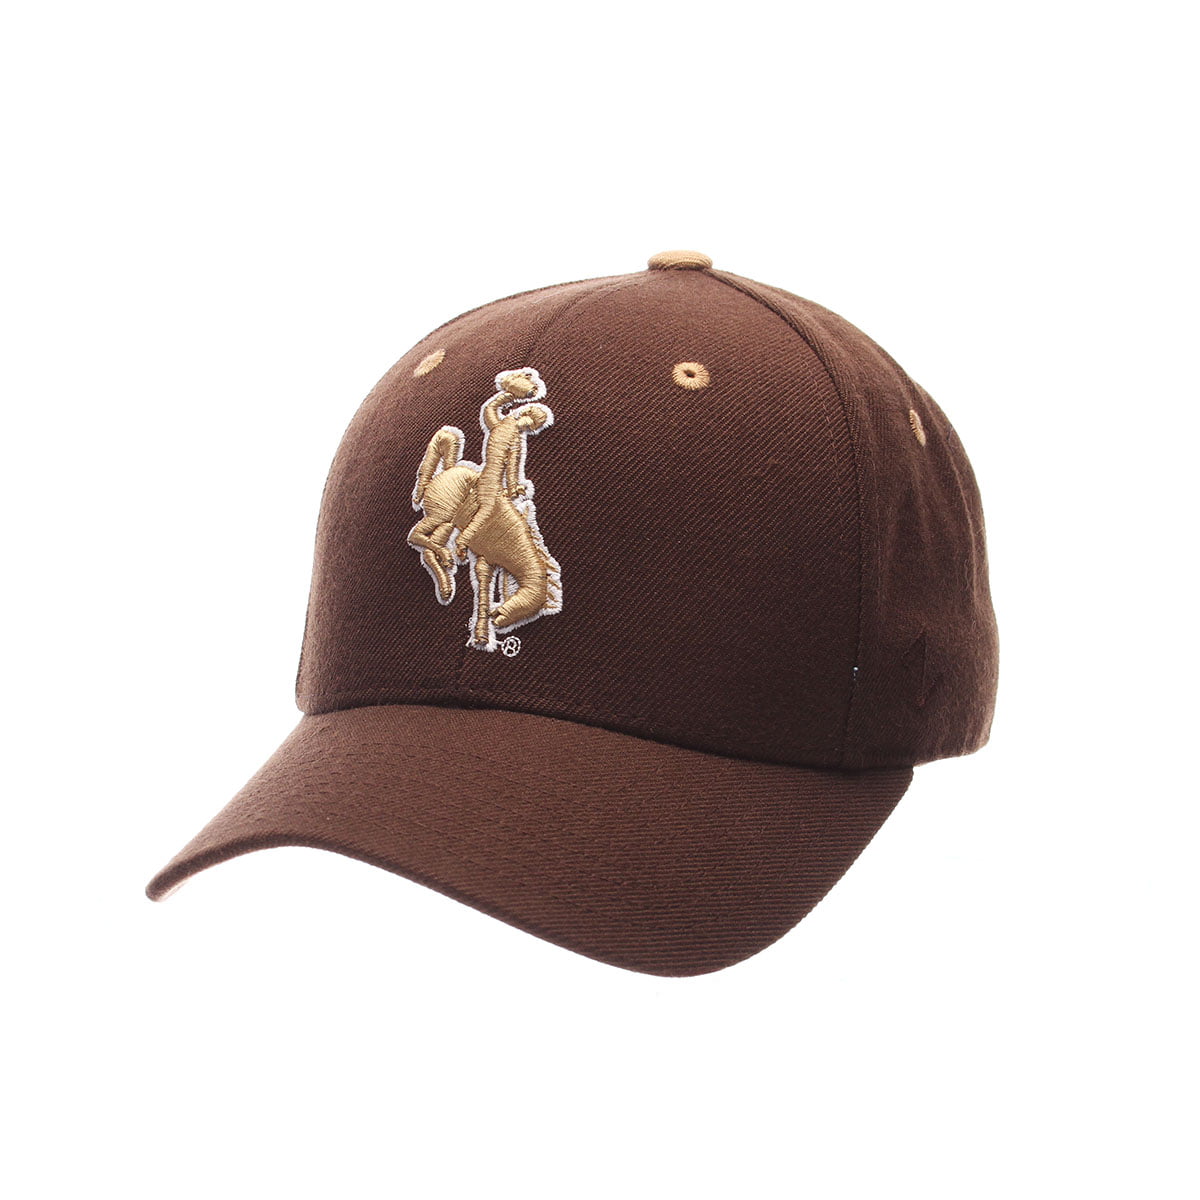 Wyoming Cowboys DHS Fitted Hat (Brown) - Walmart.com - Walmart.com